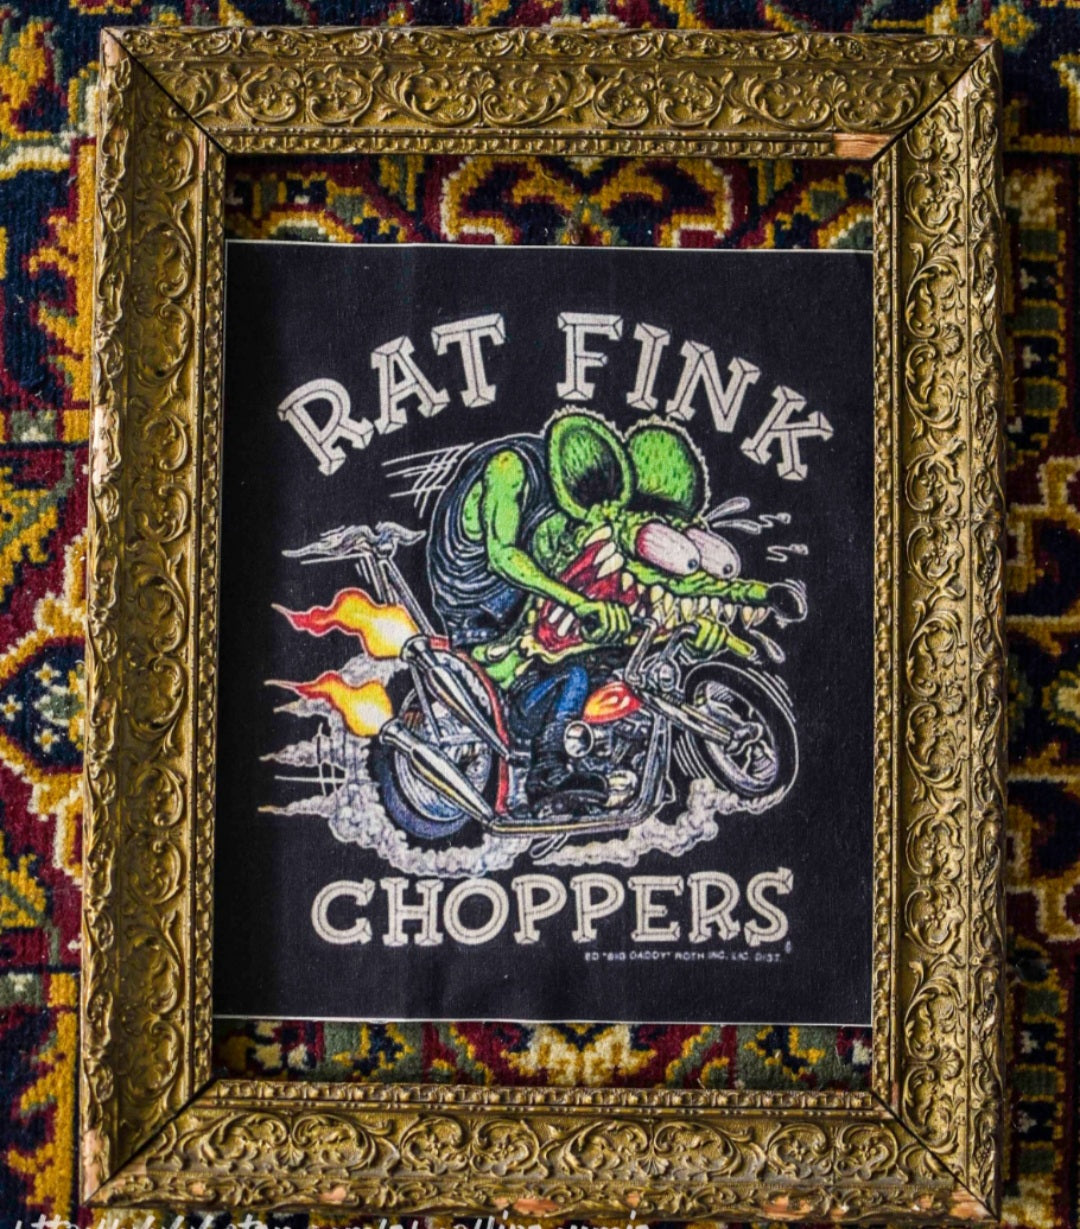 Backpatch "Rat Fink Choppers"